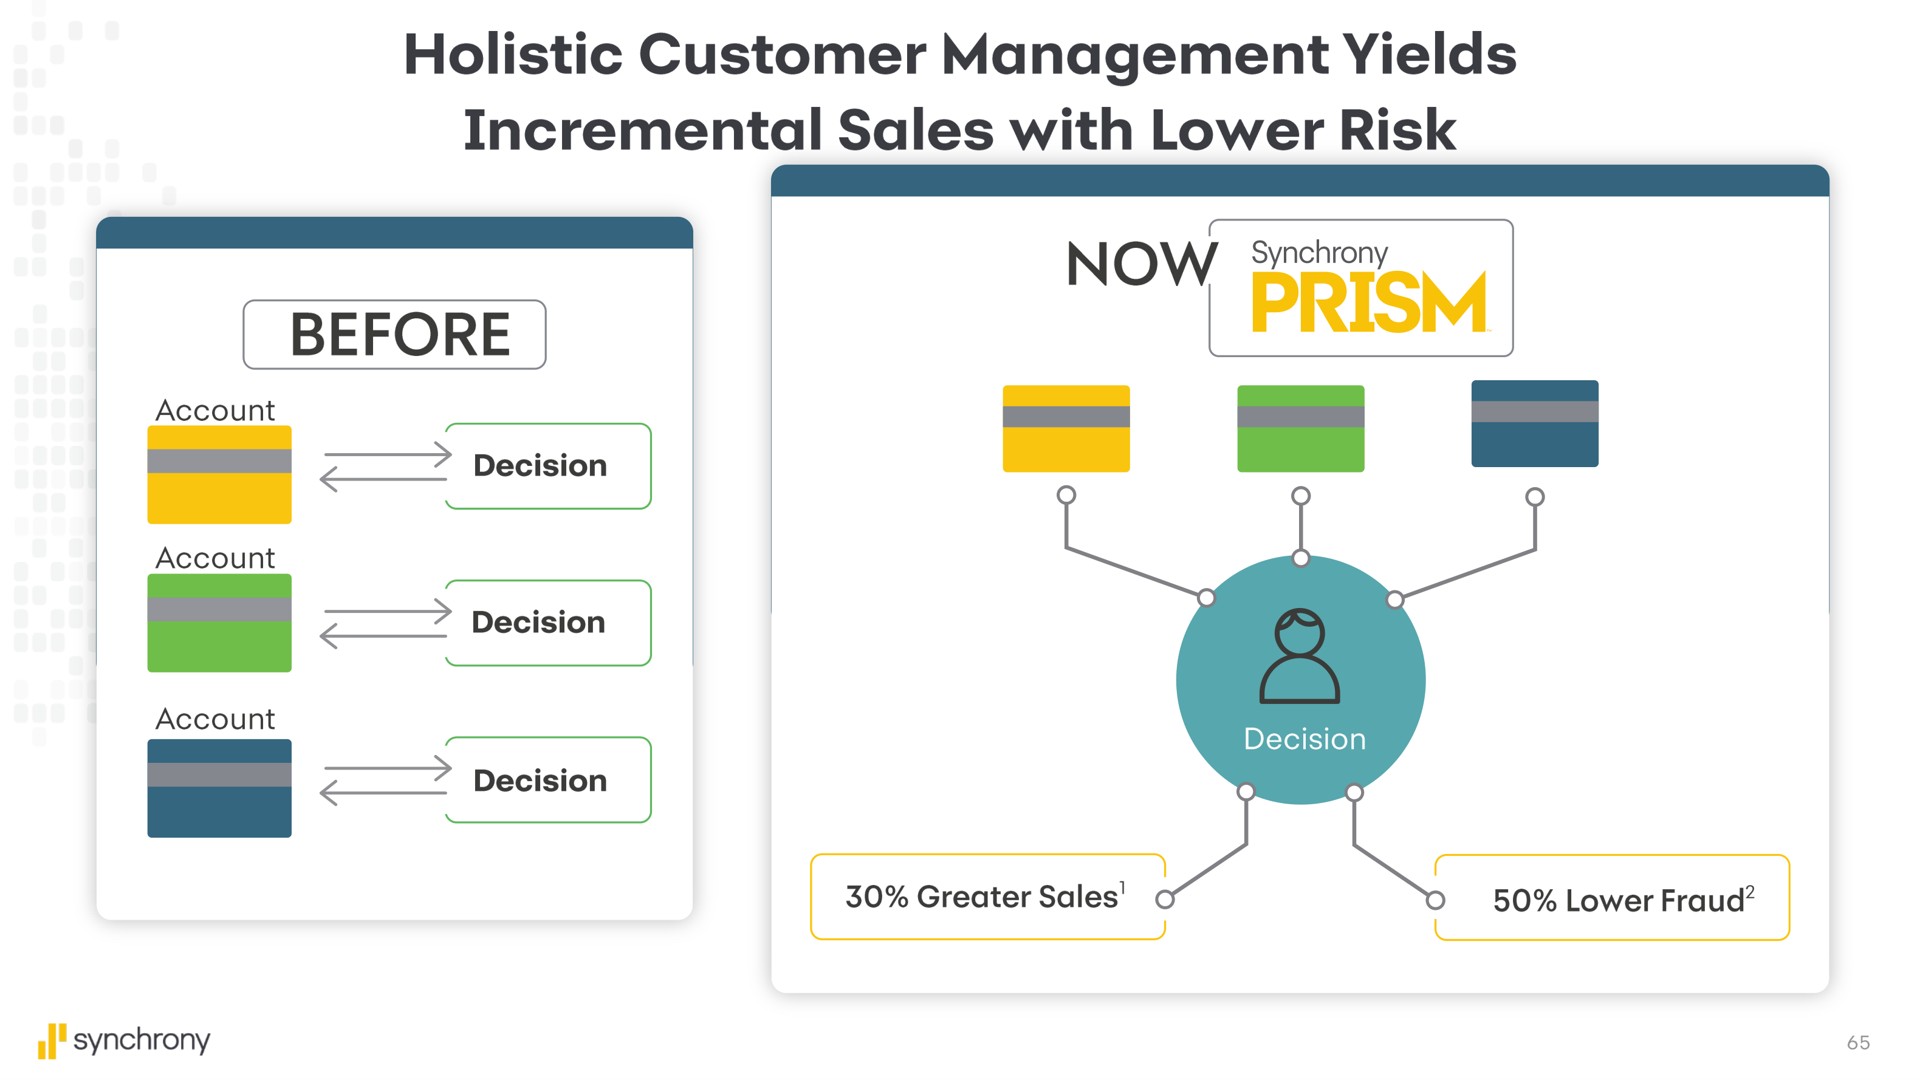 holistic customer management yields incremental sales with lower risk bis | Synchrony Financial